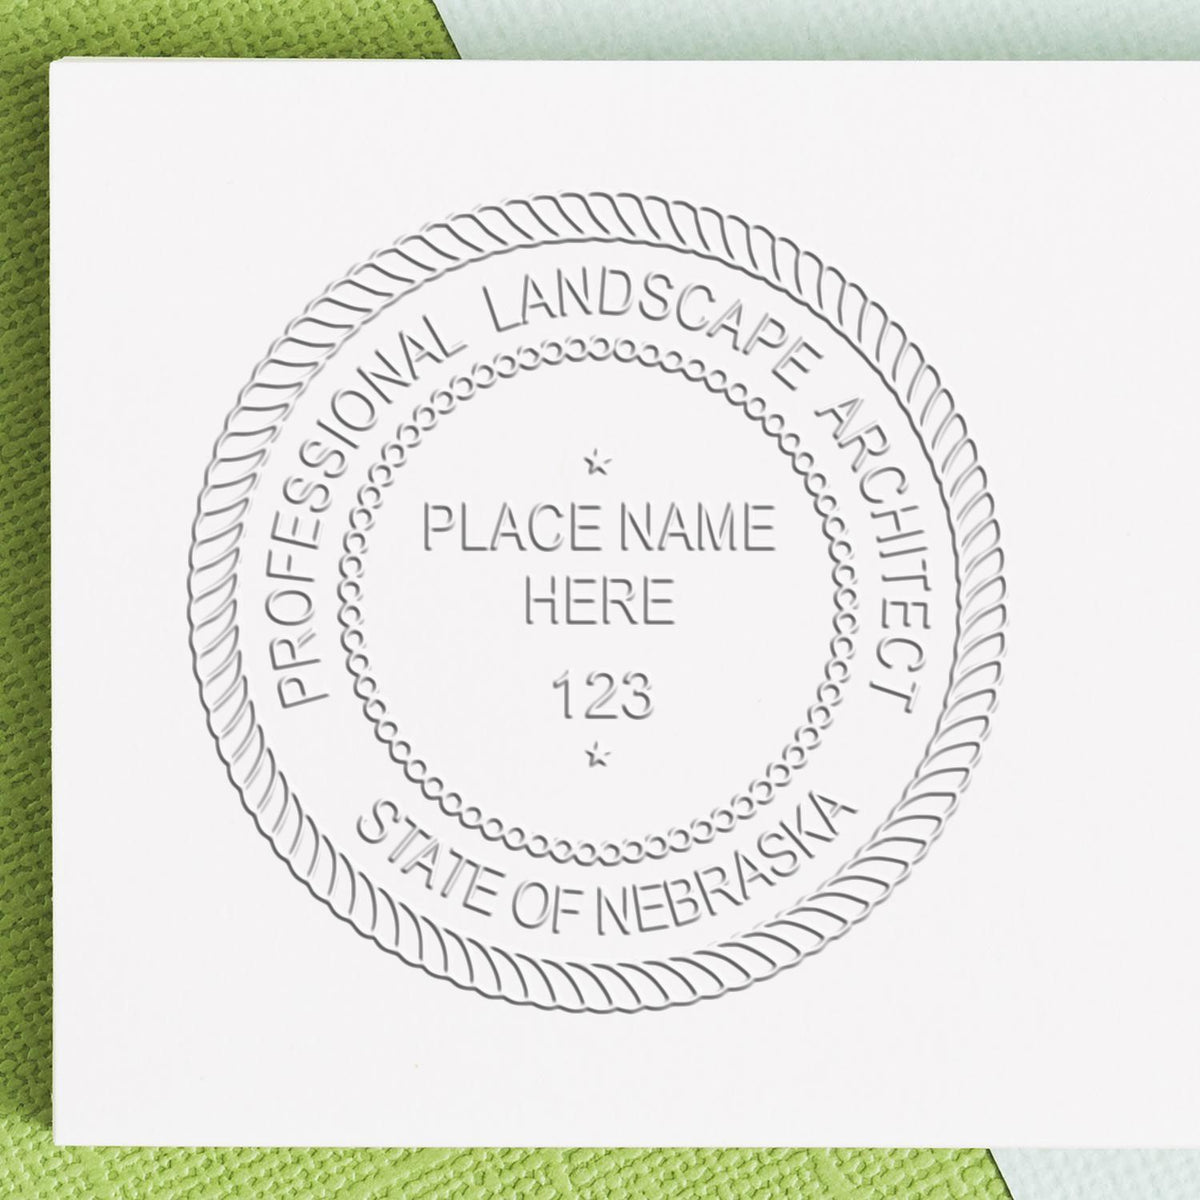 A stamped imprint of the Gift Nebraska Landscape Architect Seal in this stylish lifestyle photo, setting the tone for a unique and personalized product.